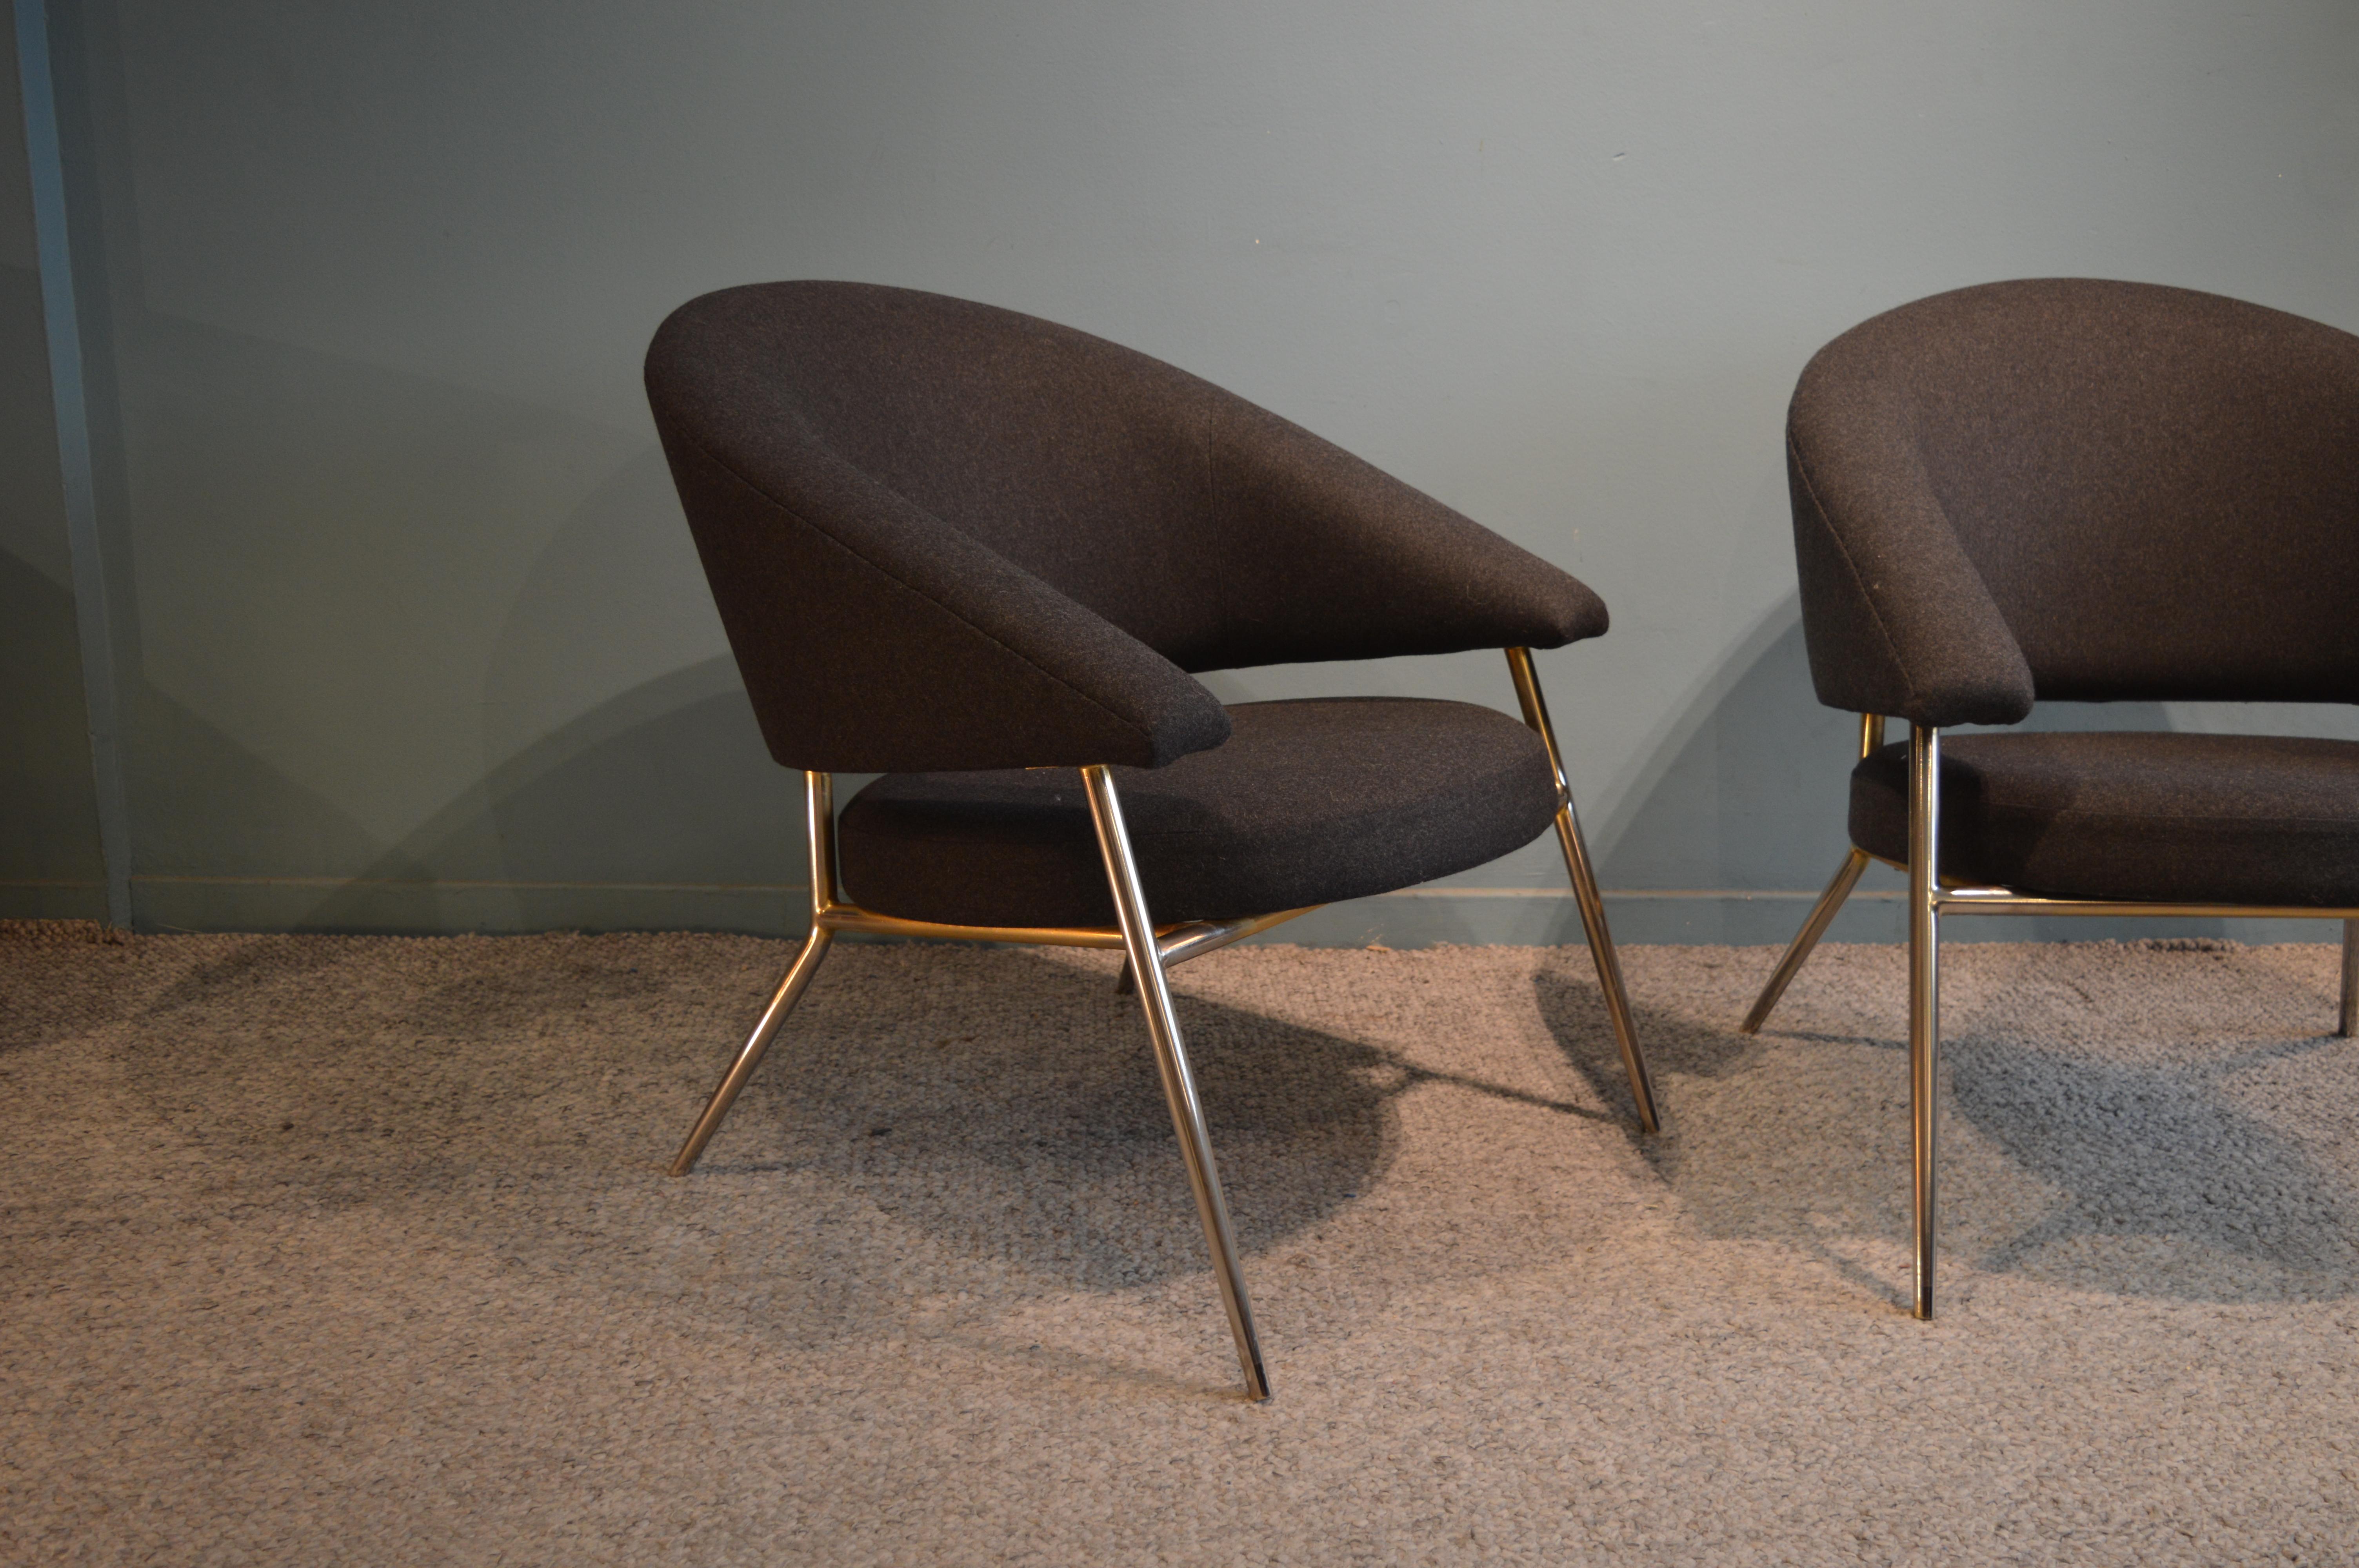 Pair of armchairs by Maurice Cabrol for Malita.
French work circa 1960.
Steel and fabric.
Reupholstered with fabric by Maison Nobilis.